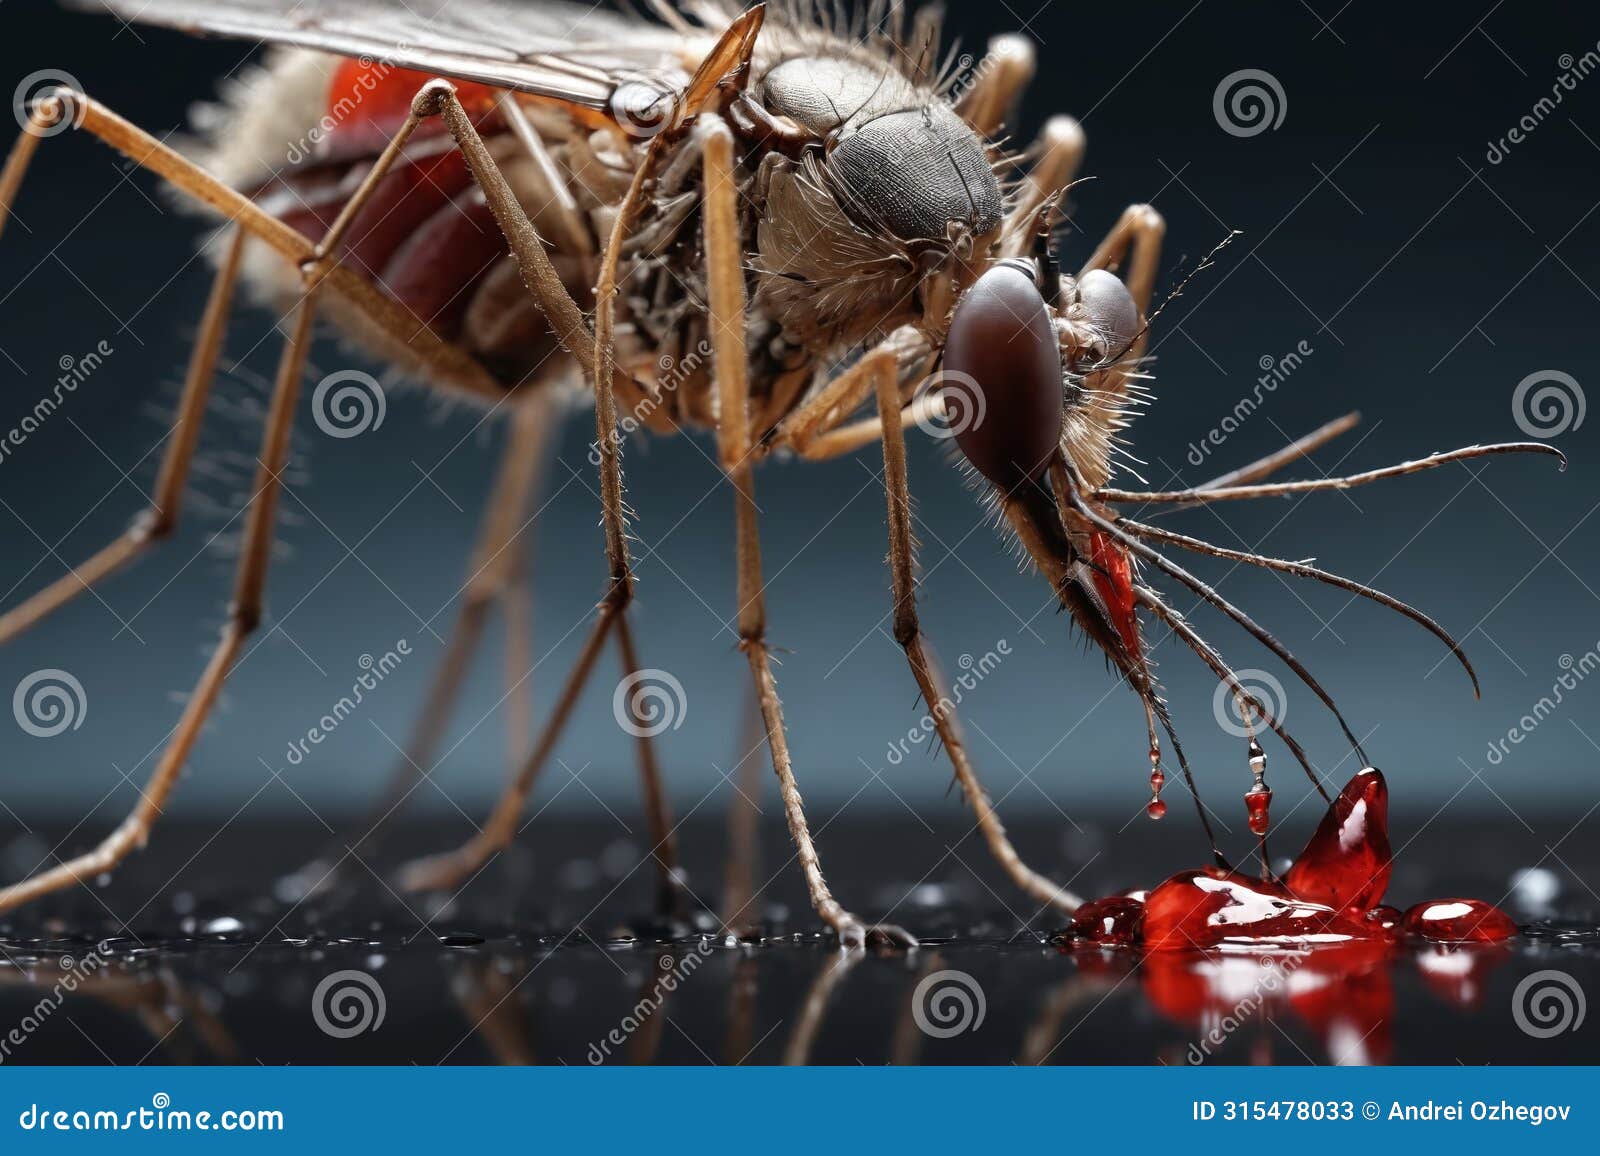 disease close-up: detailed macro of aedes aegypti mosquito